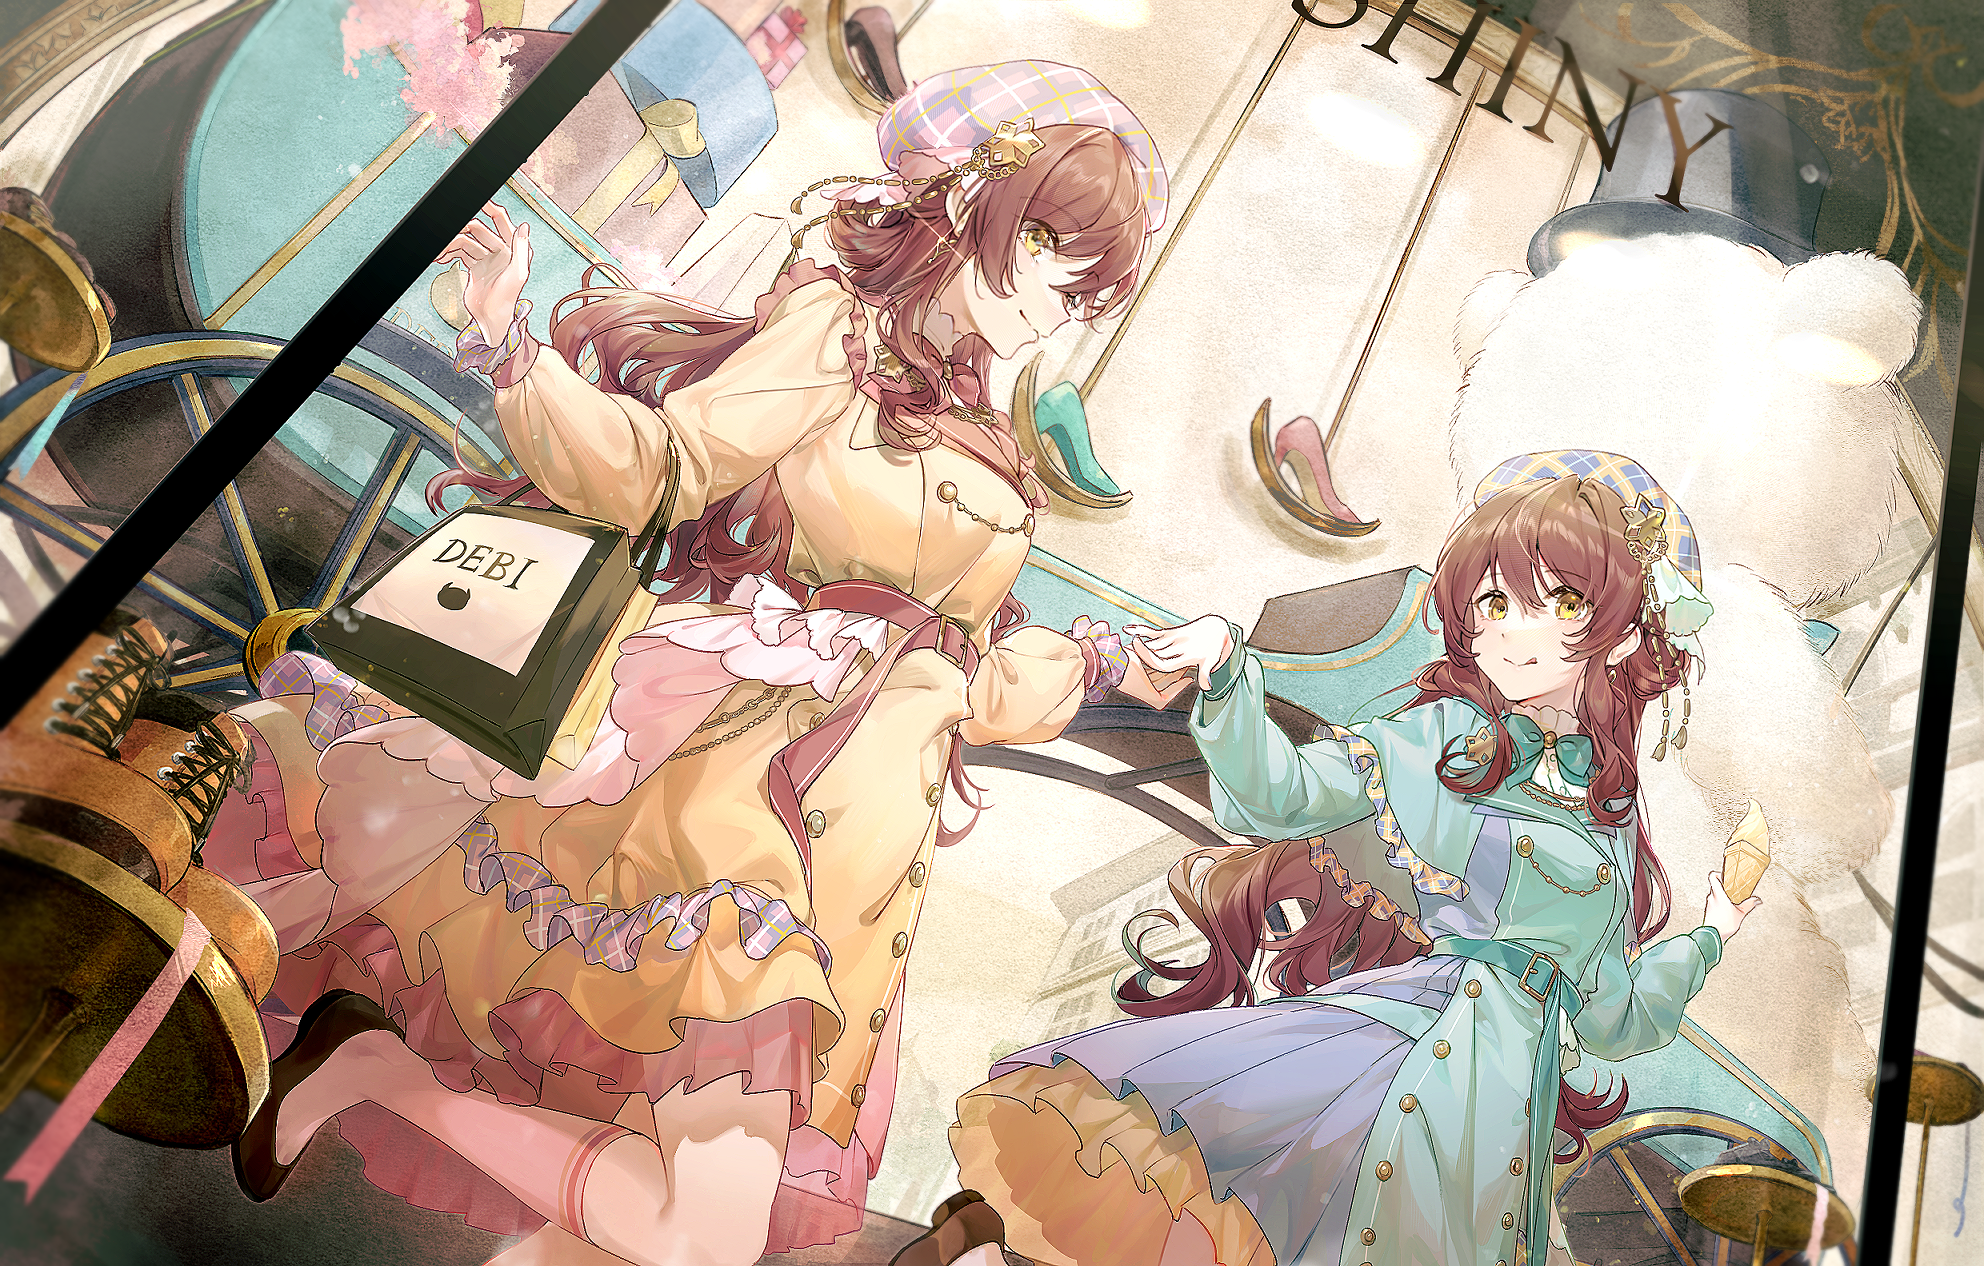 Anime 1984x1266 two women anime anime girls dress smiling tongue out looking at viewer long hair purse shoes heels brunette brown eyes hat holding hands bow tie teddy bears